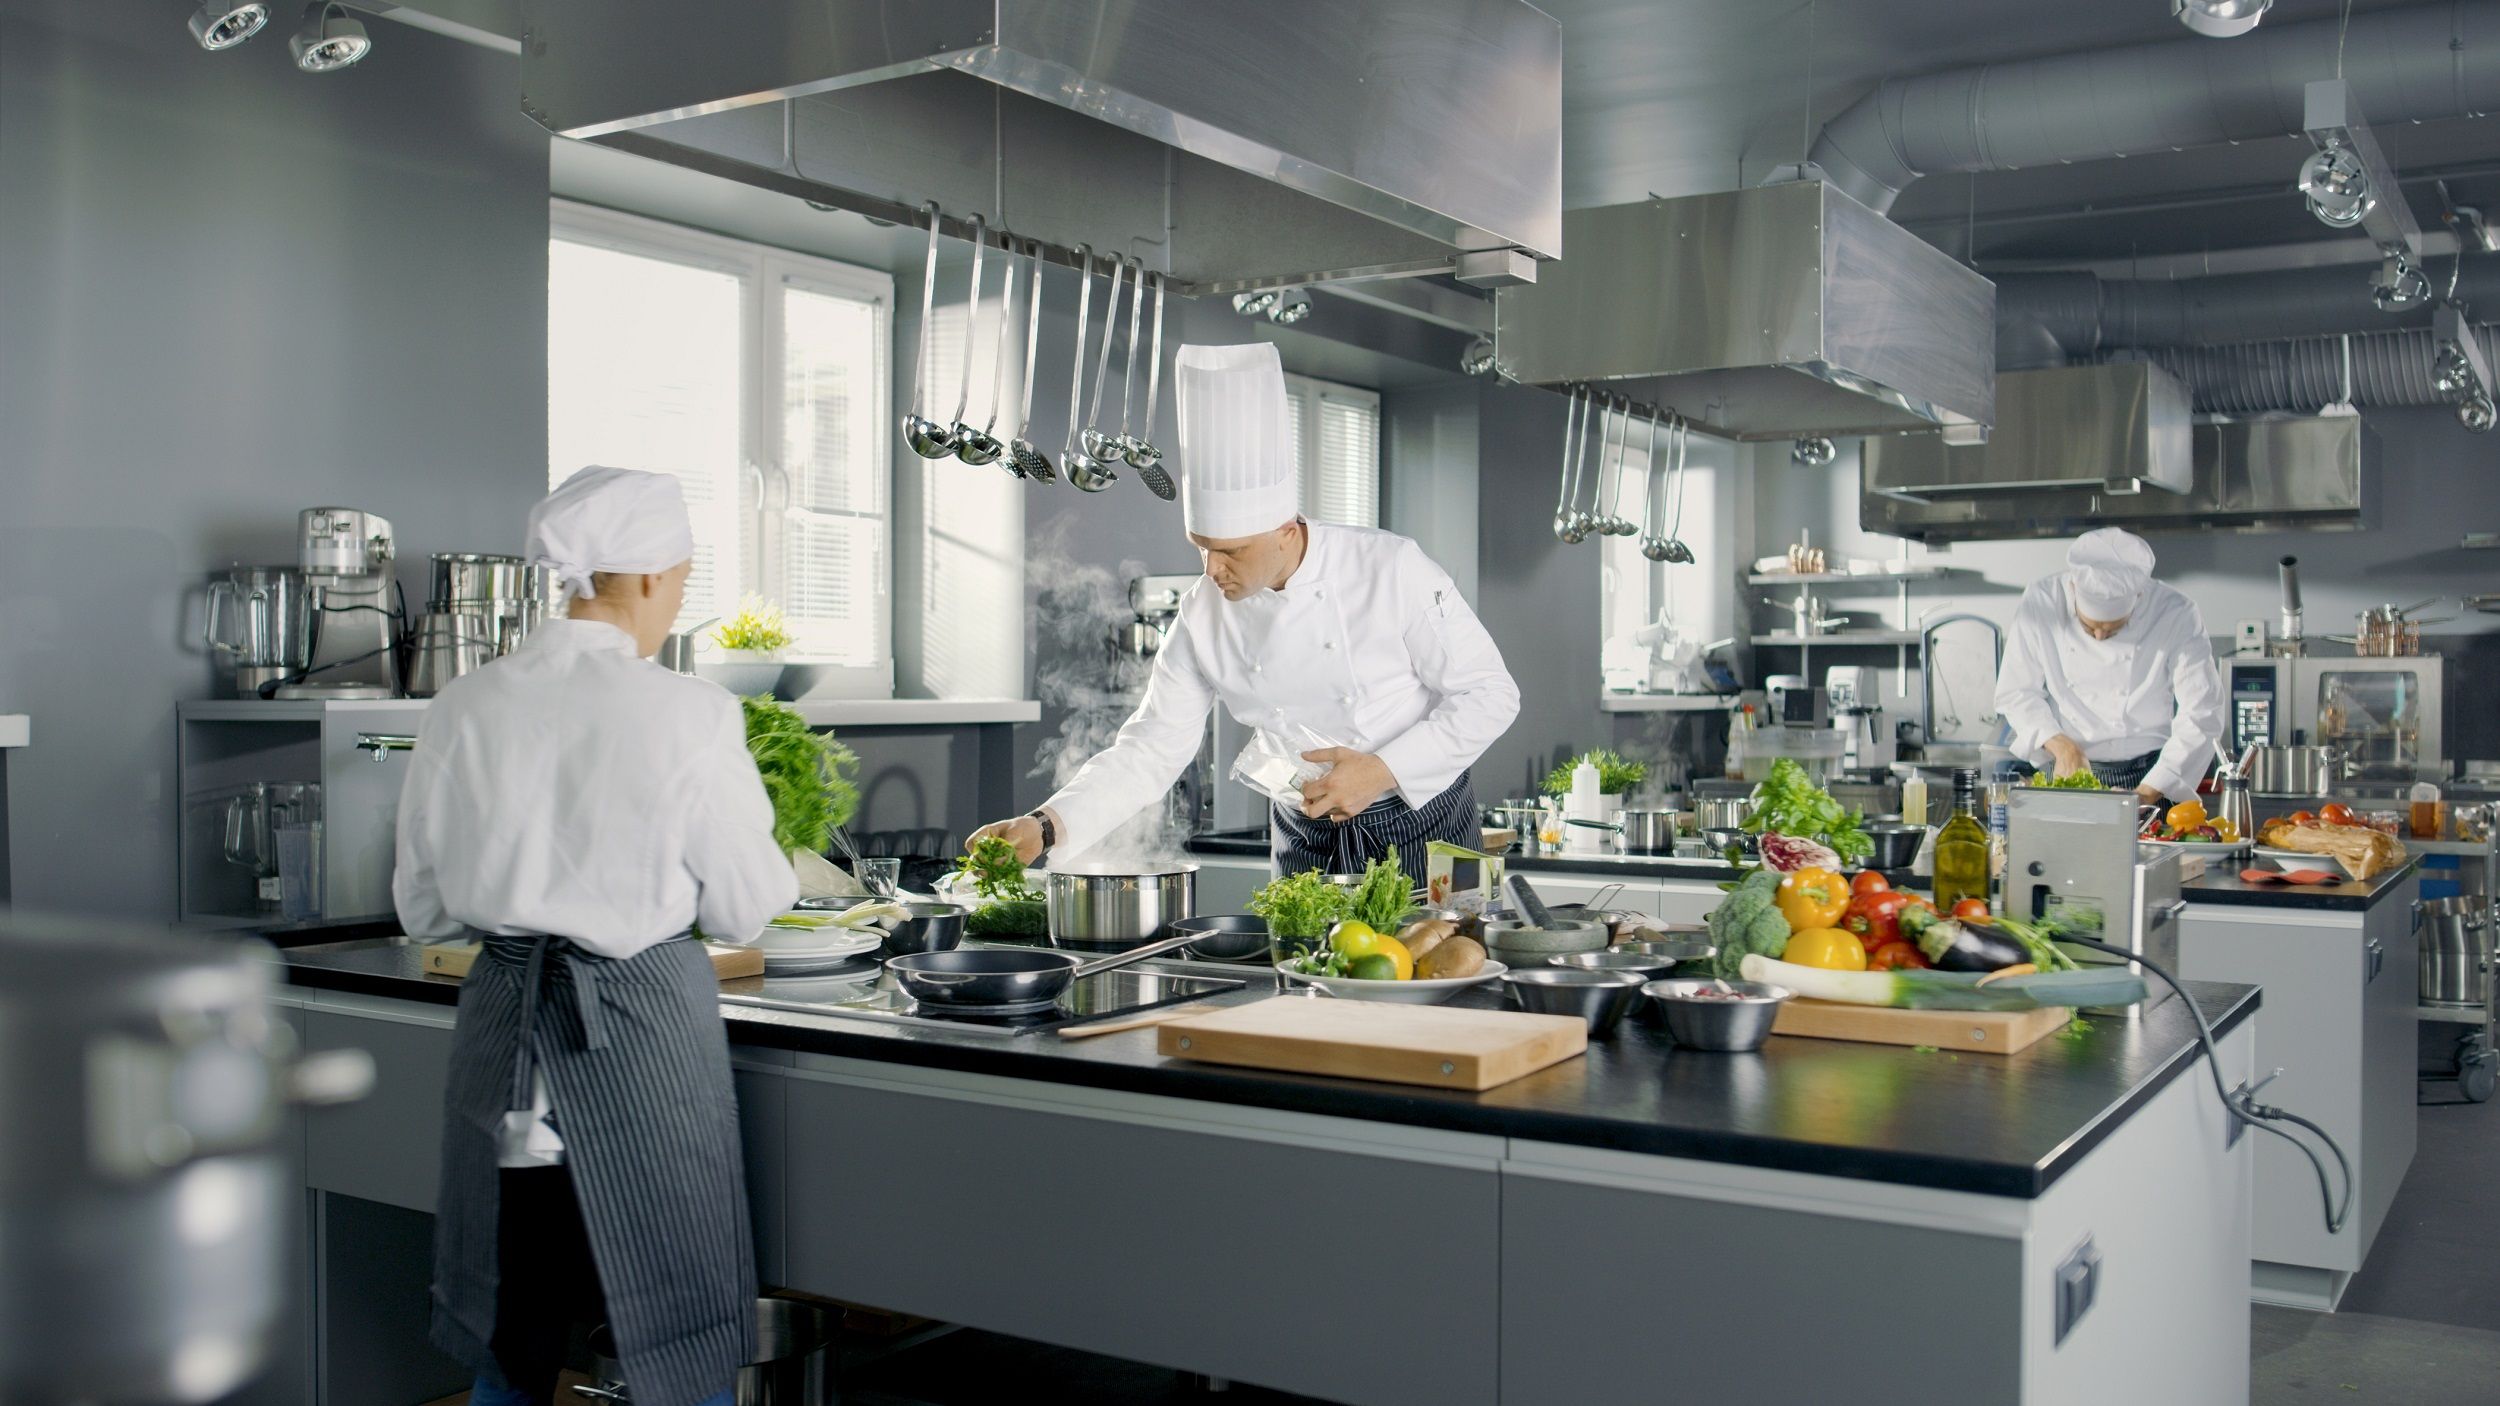 Uses of an industrial kitchen-What is a konsep cloud kitchen